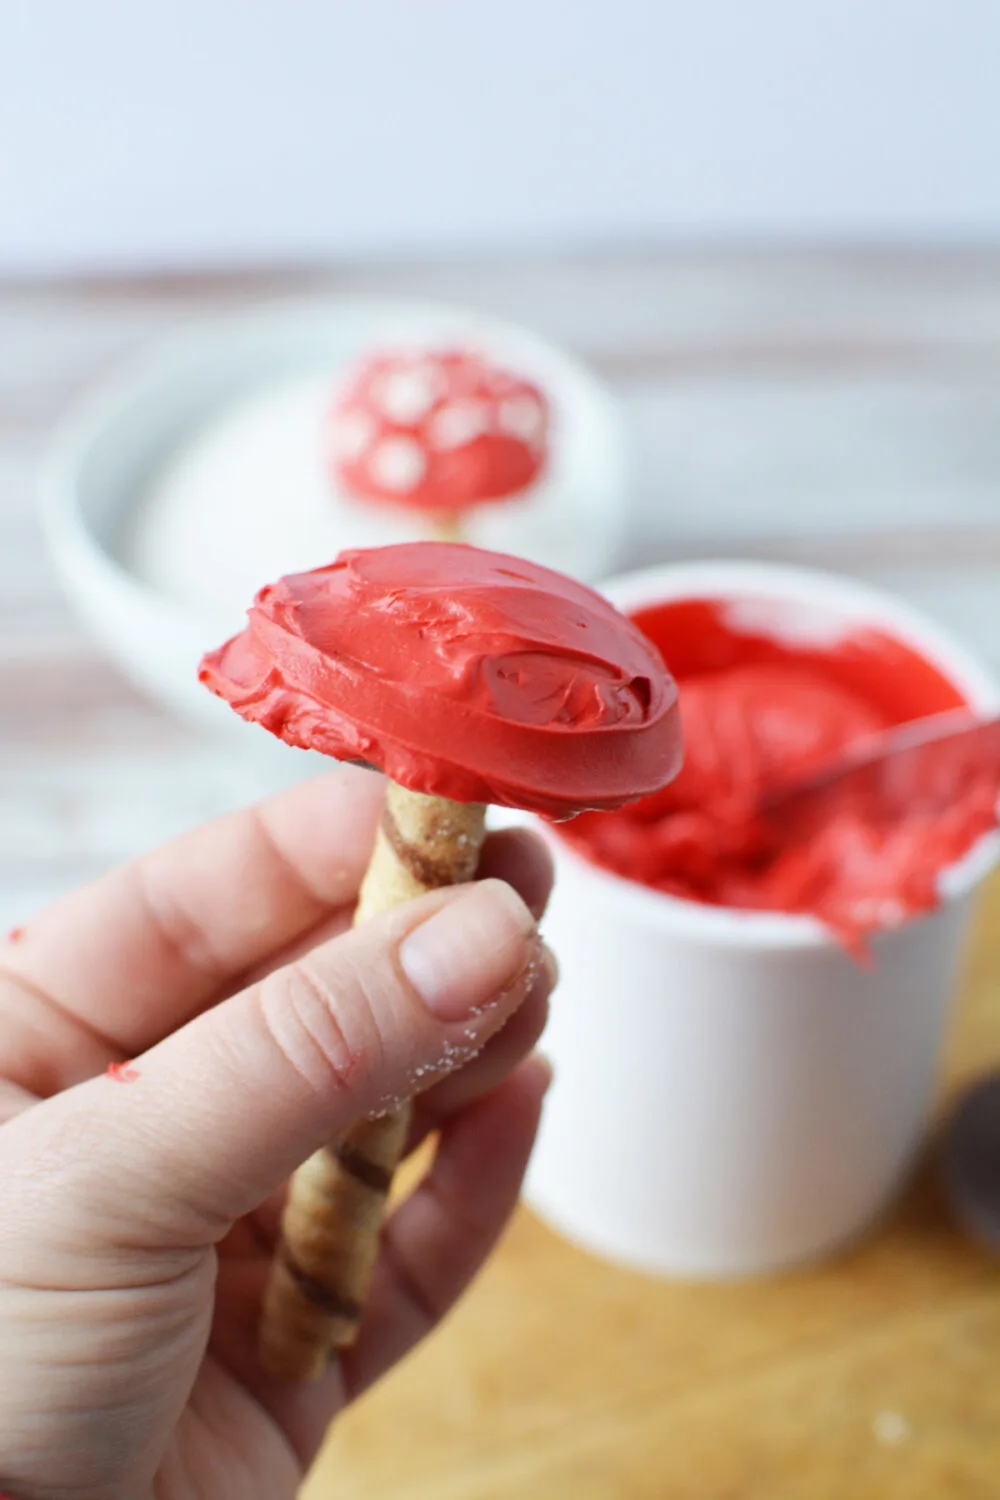 Red frosting on an edible toadstool.